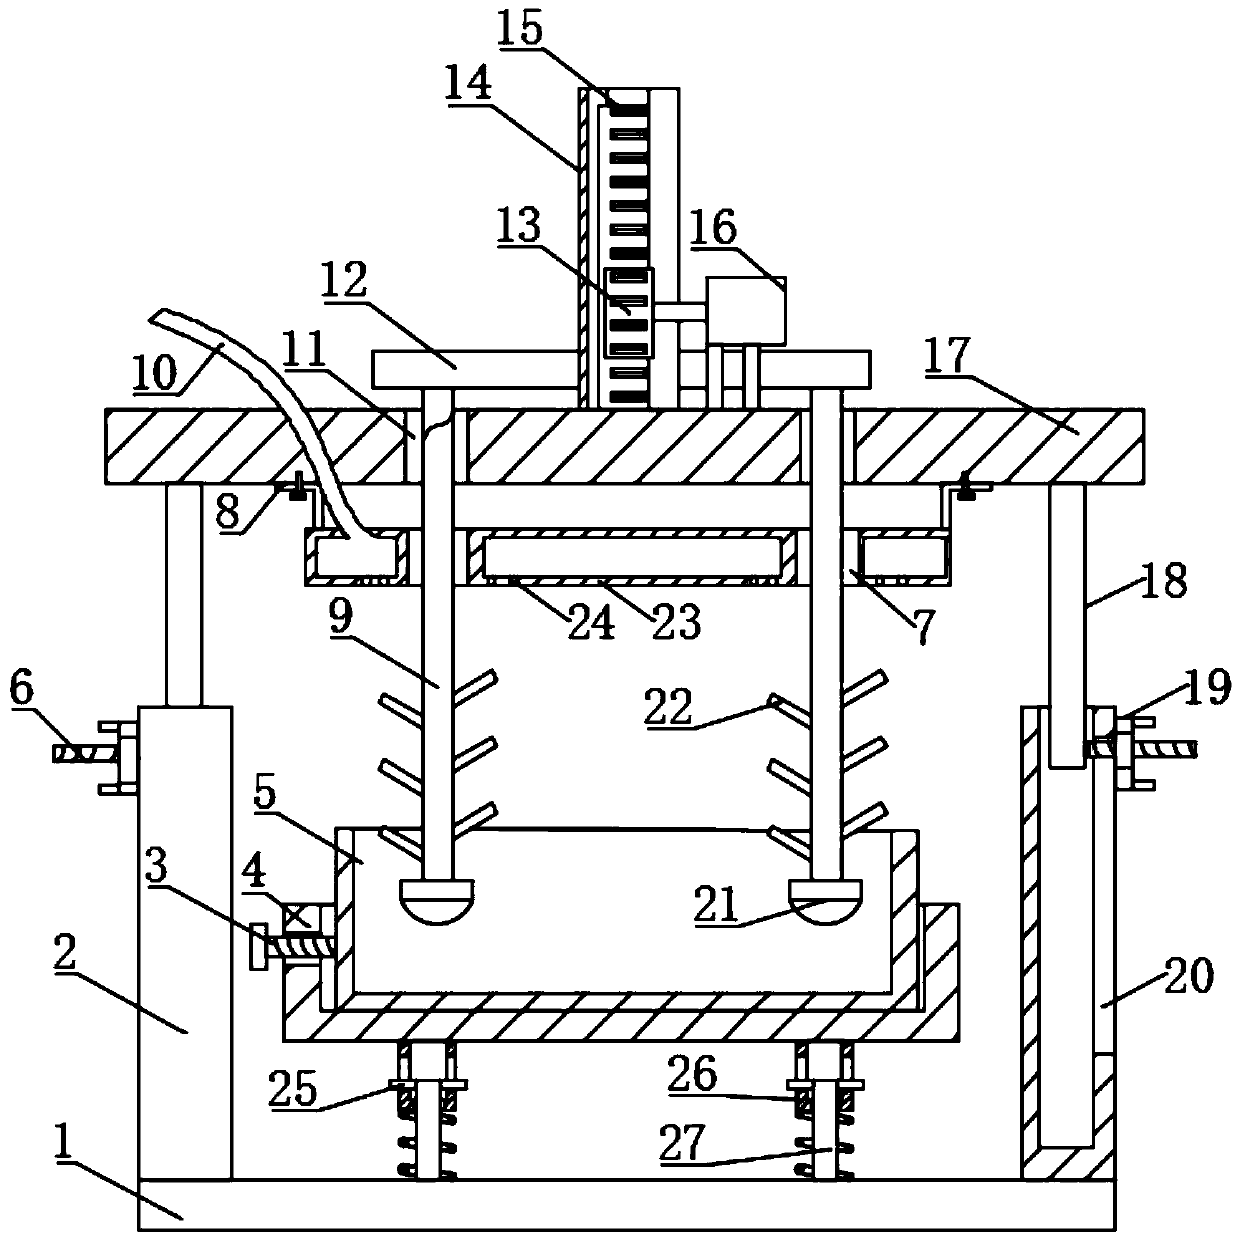 Mechanical vibrating device used in concrete test process